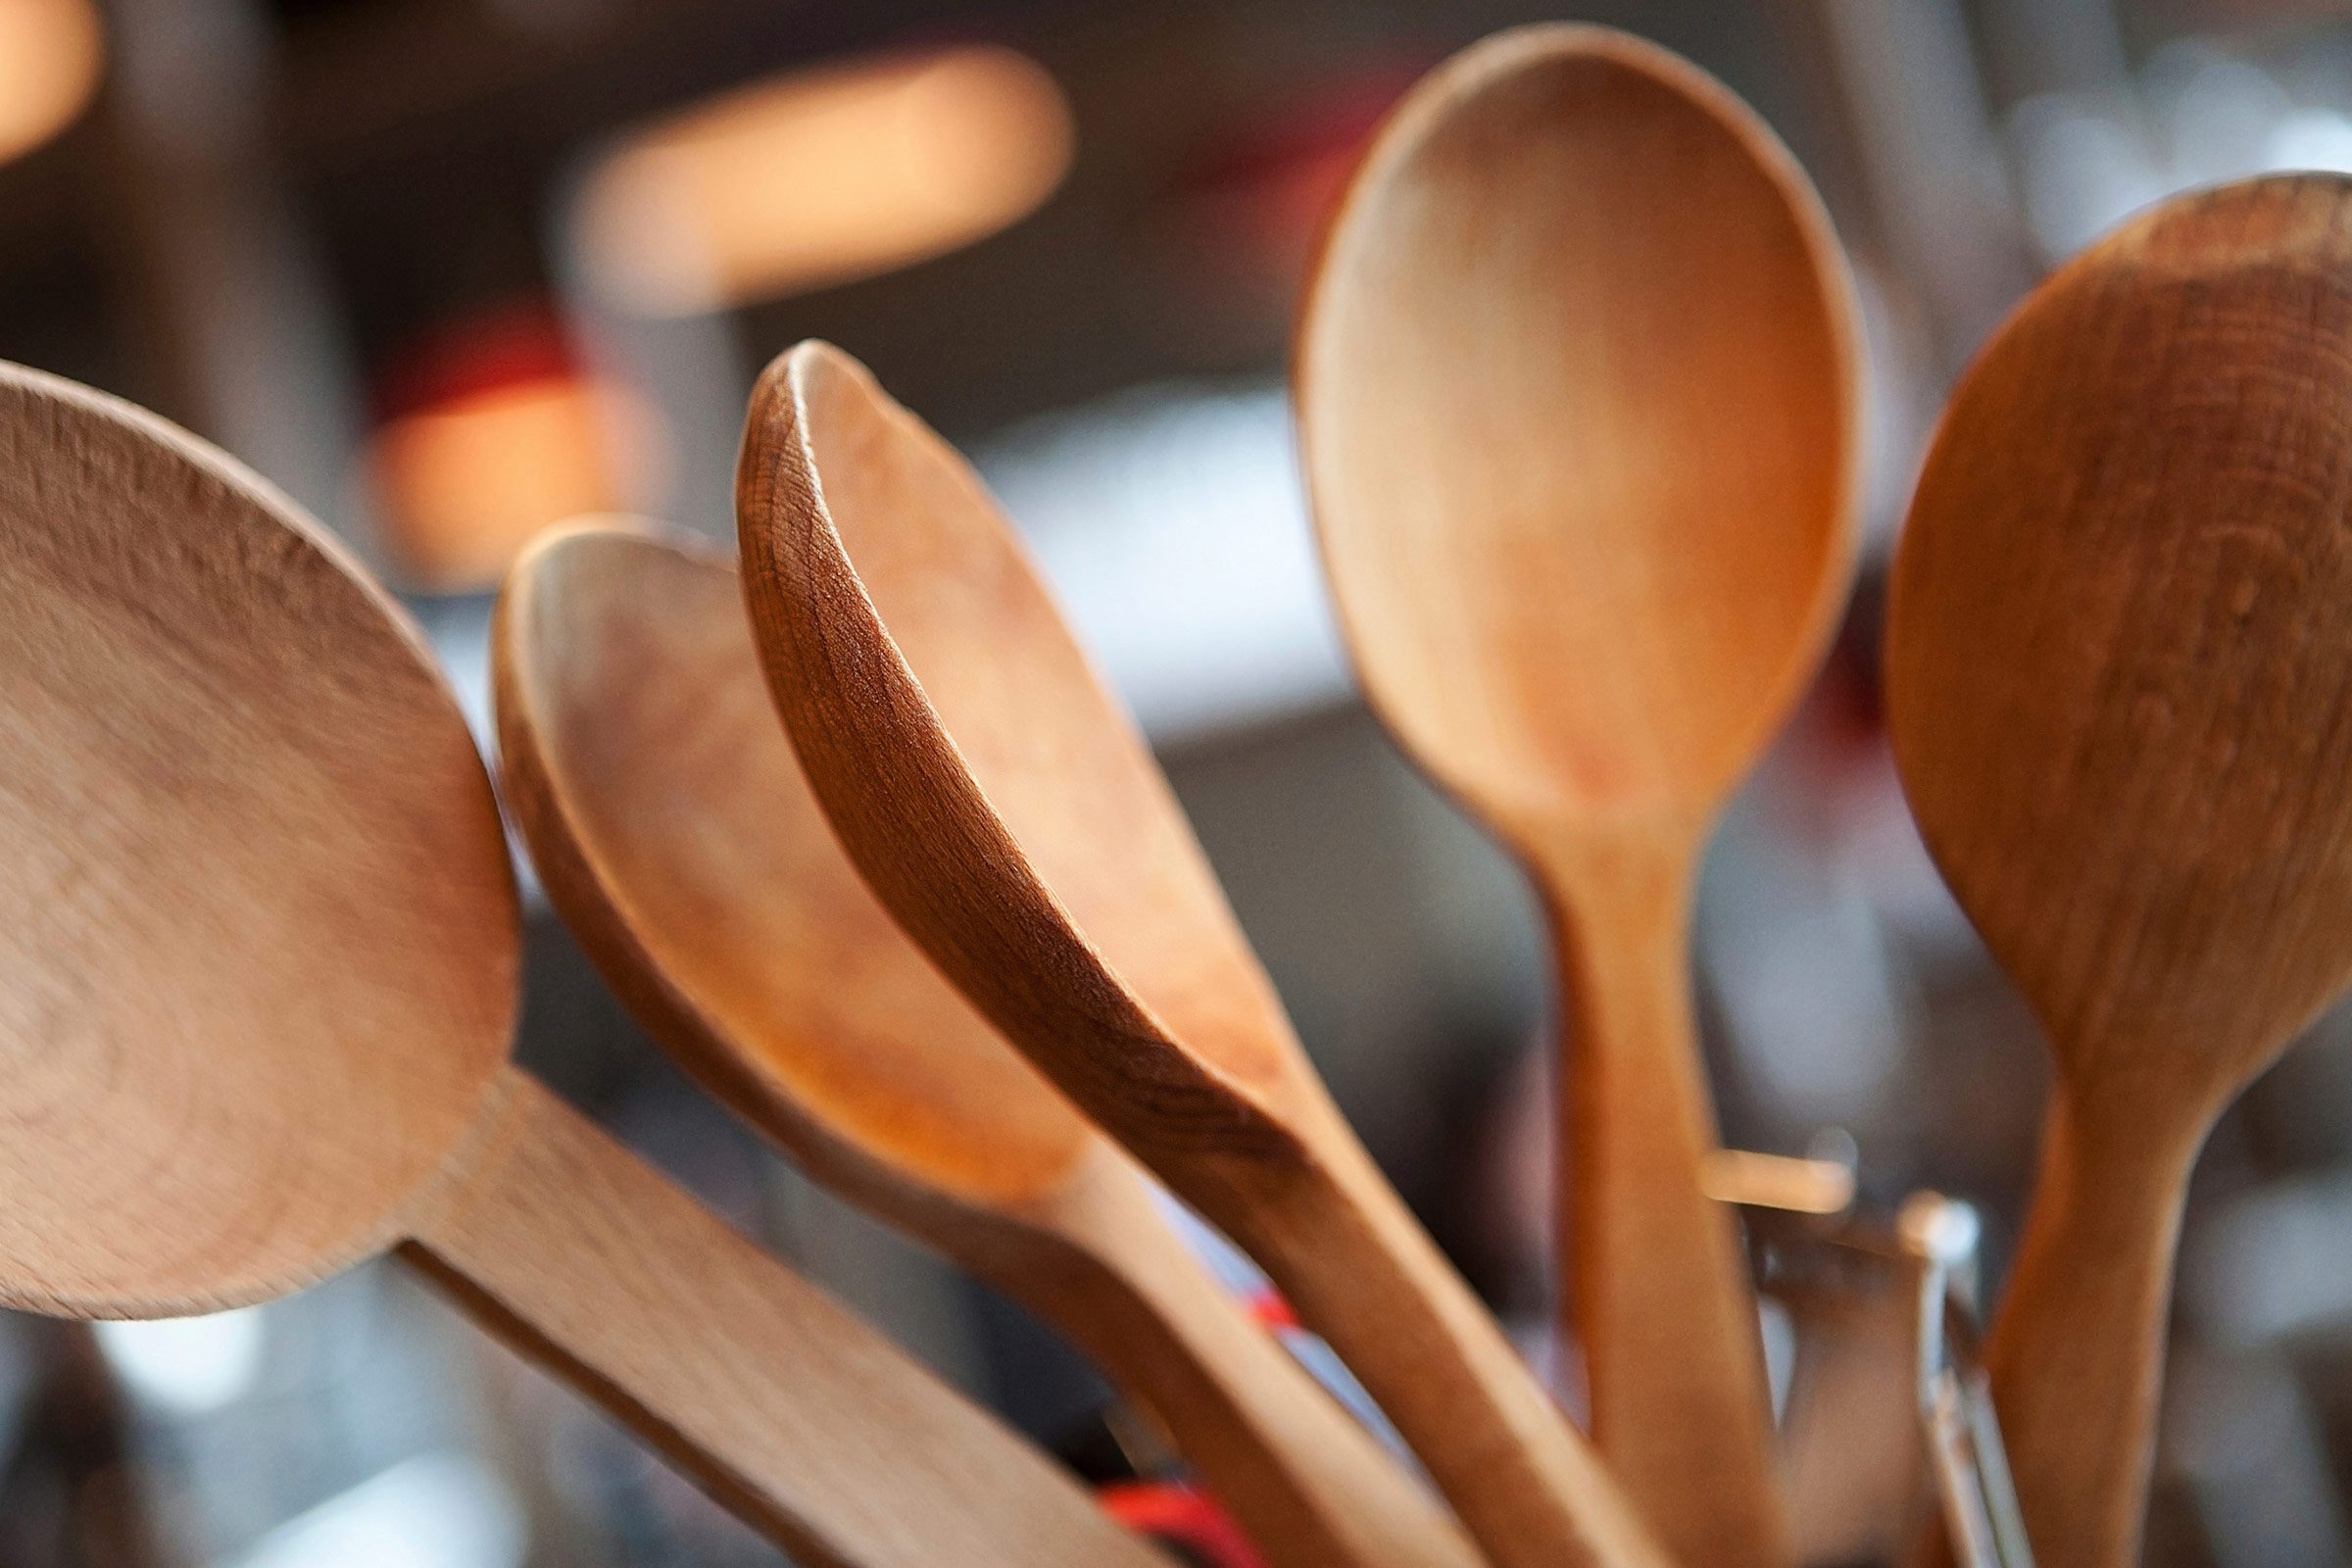 How to Clean a Smelly Wooden Spoon | Reader's Digest